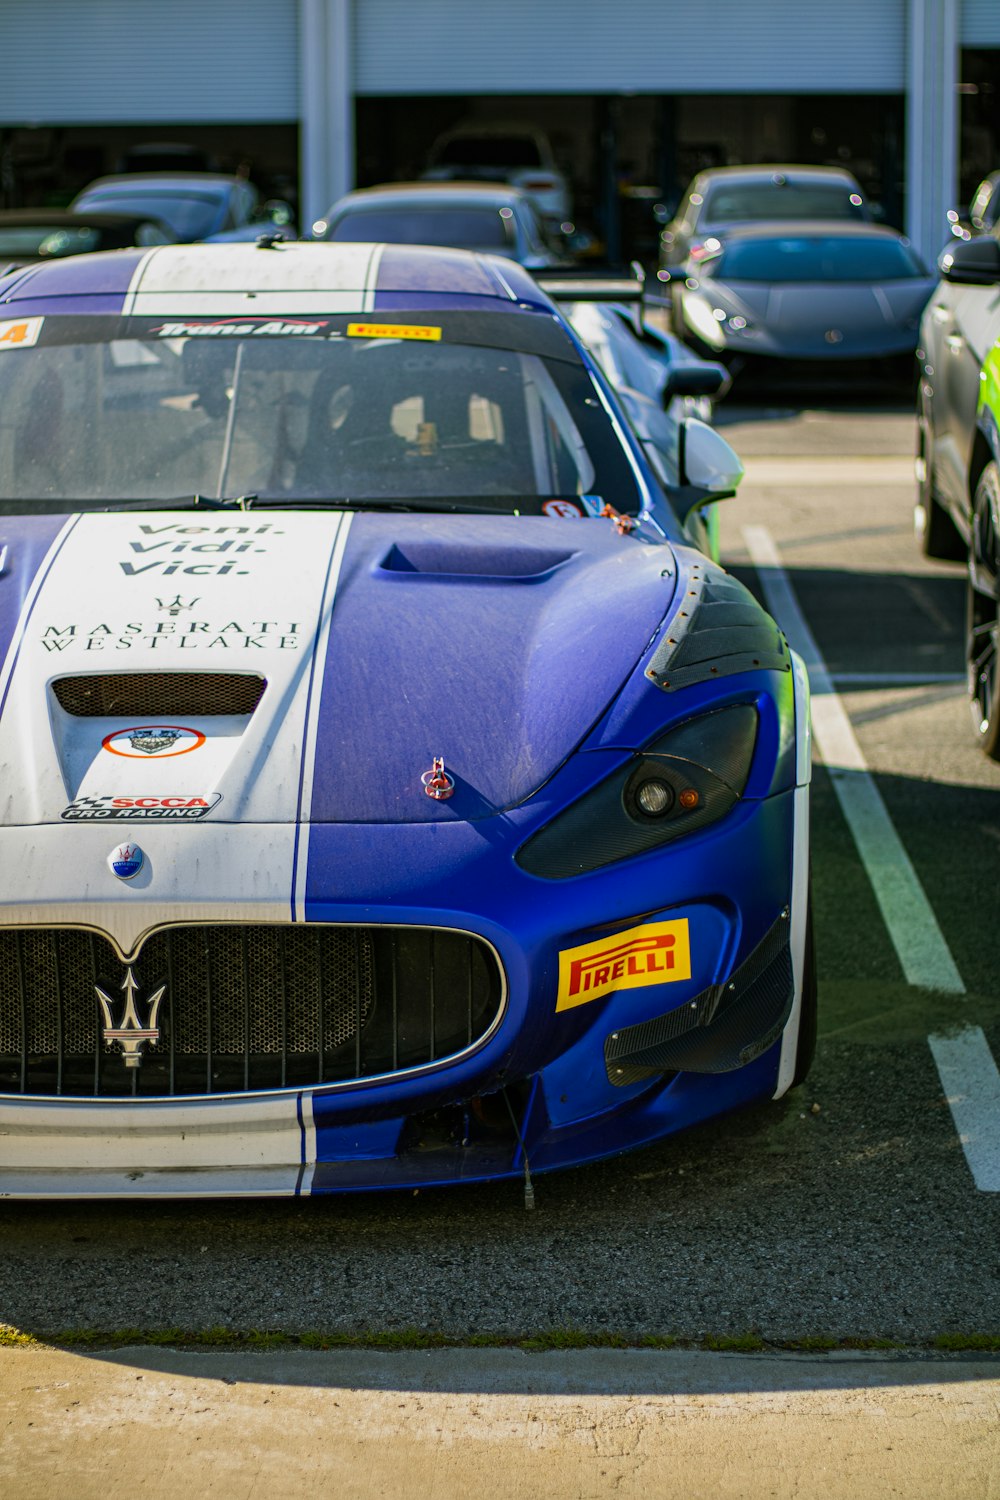 a blue and white sports car parked in a parking lot